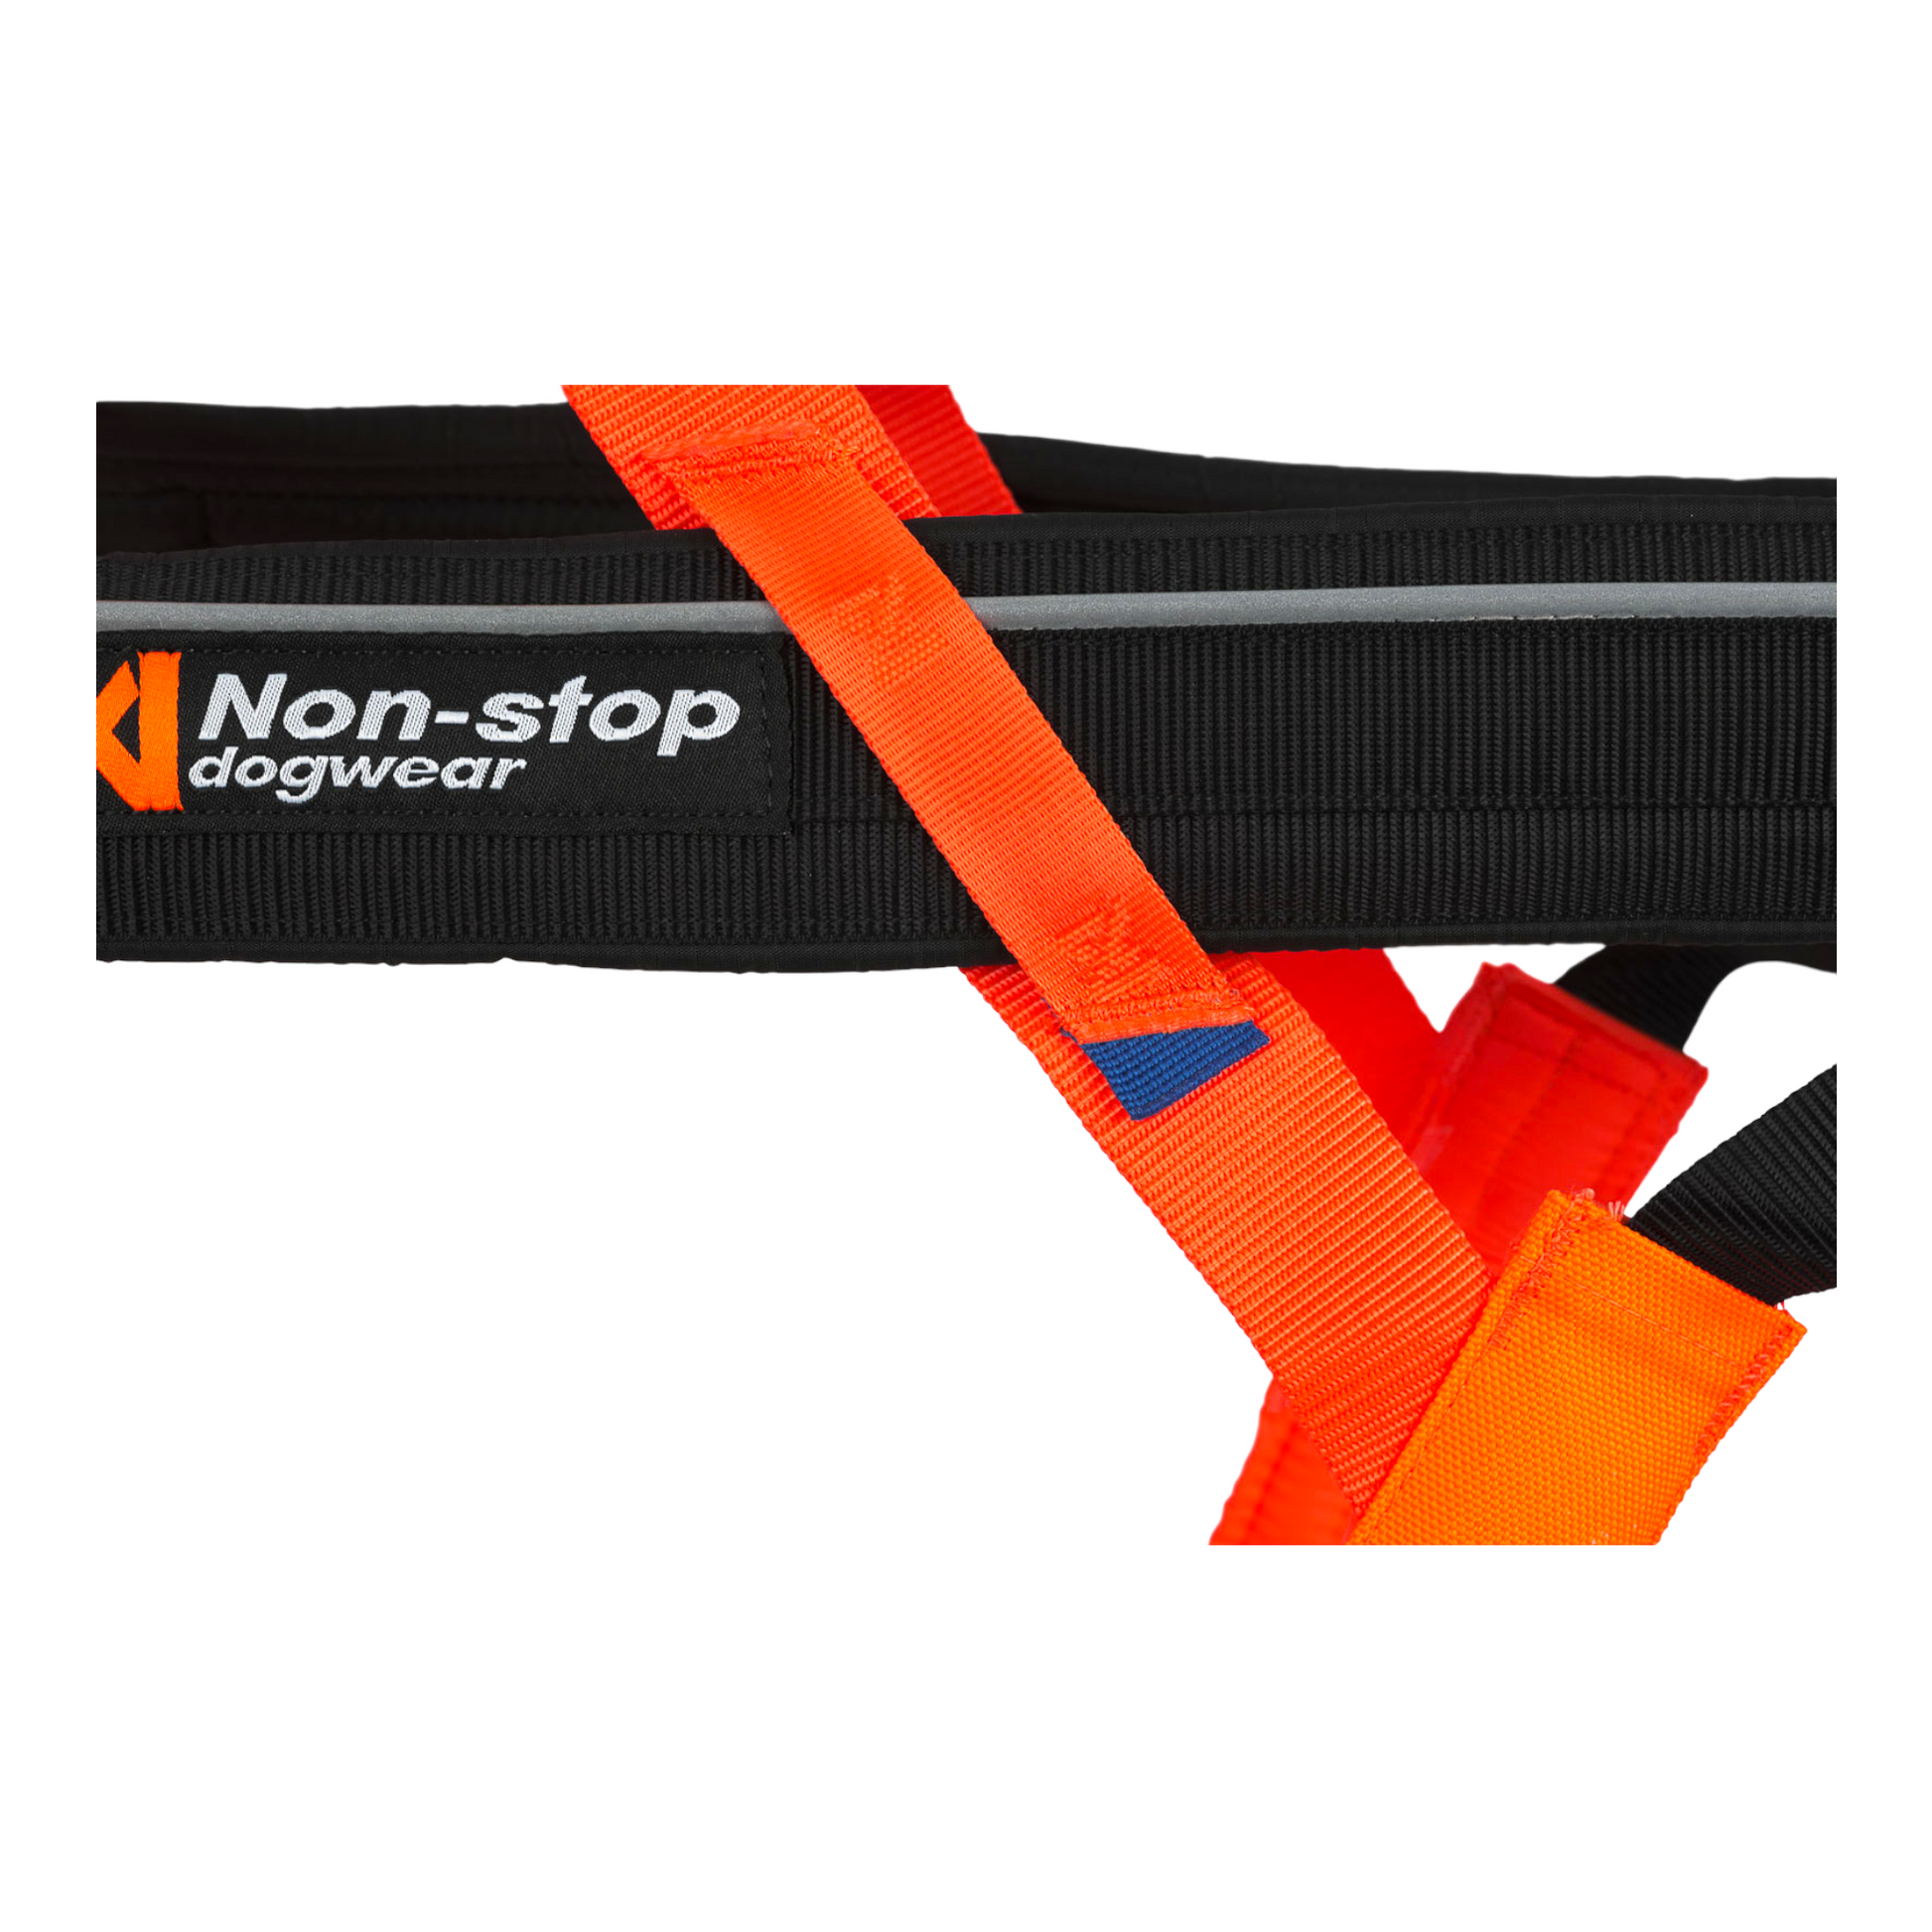 Non-stop dogwear Freemotion harness 5.0, Size flag